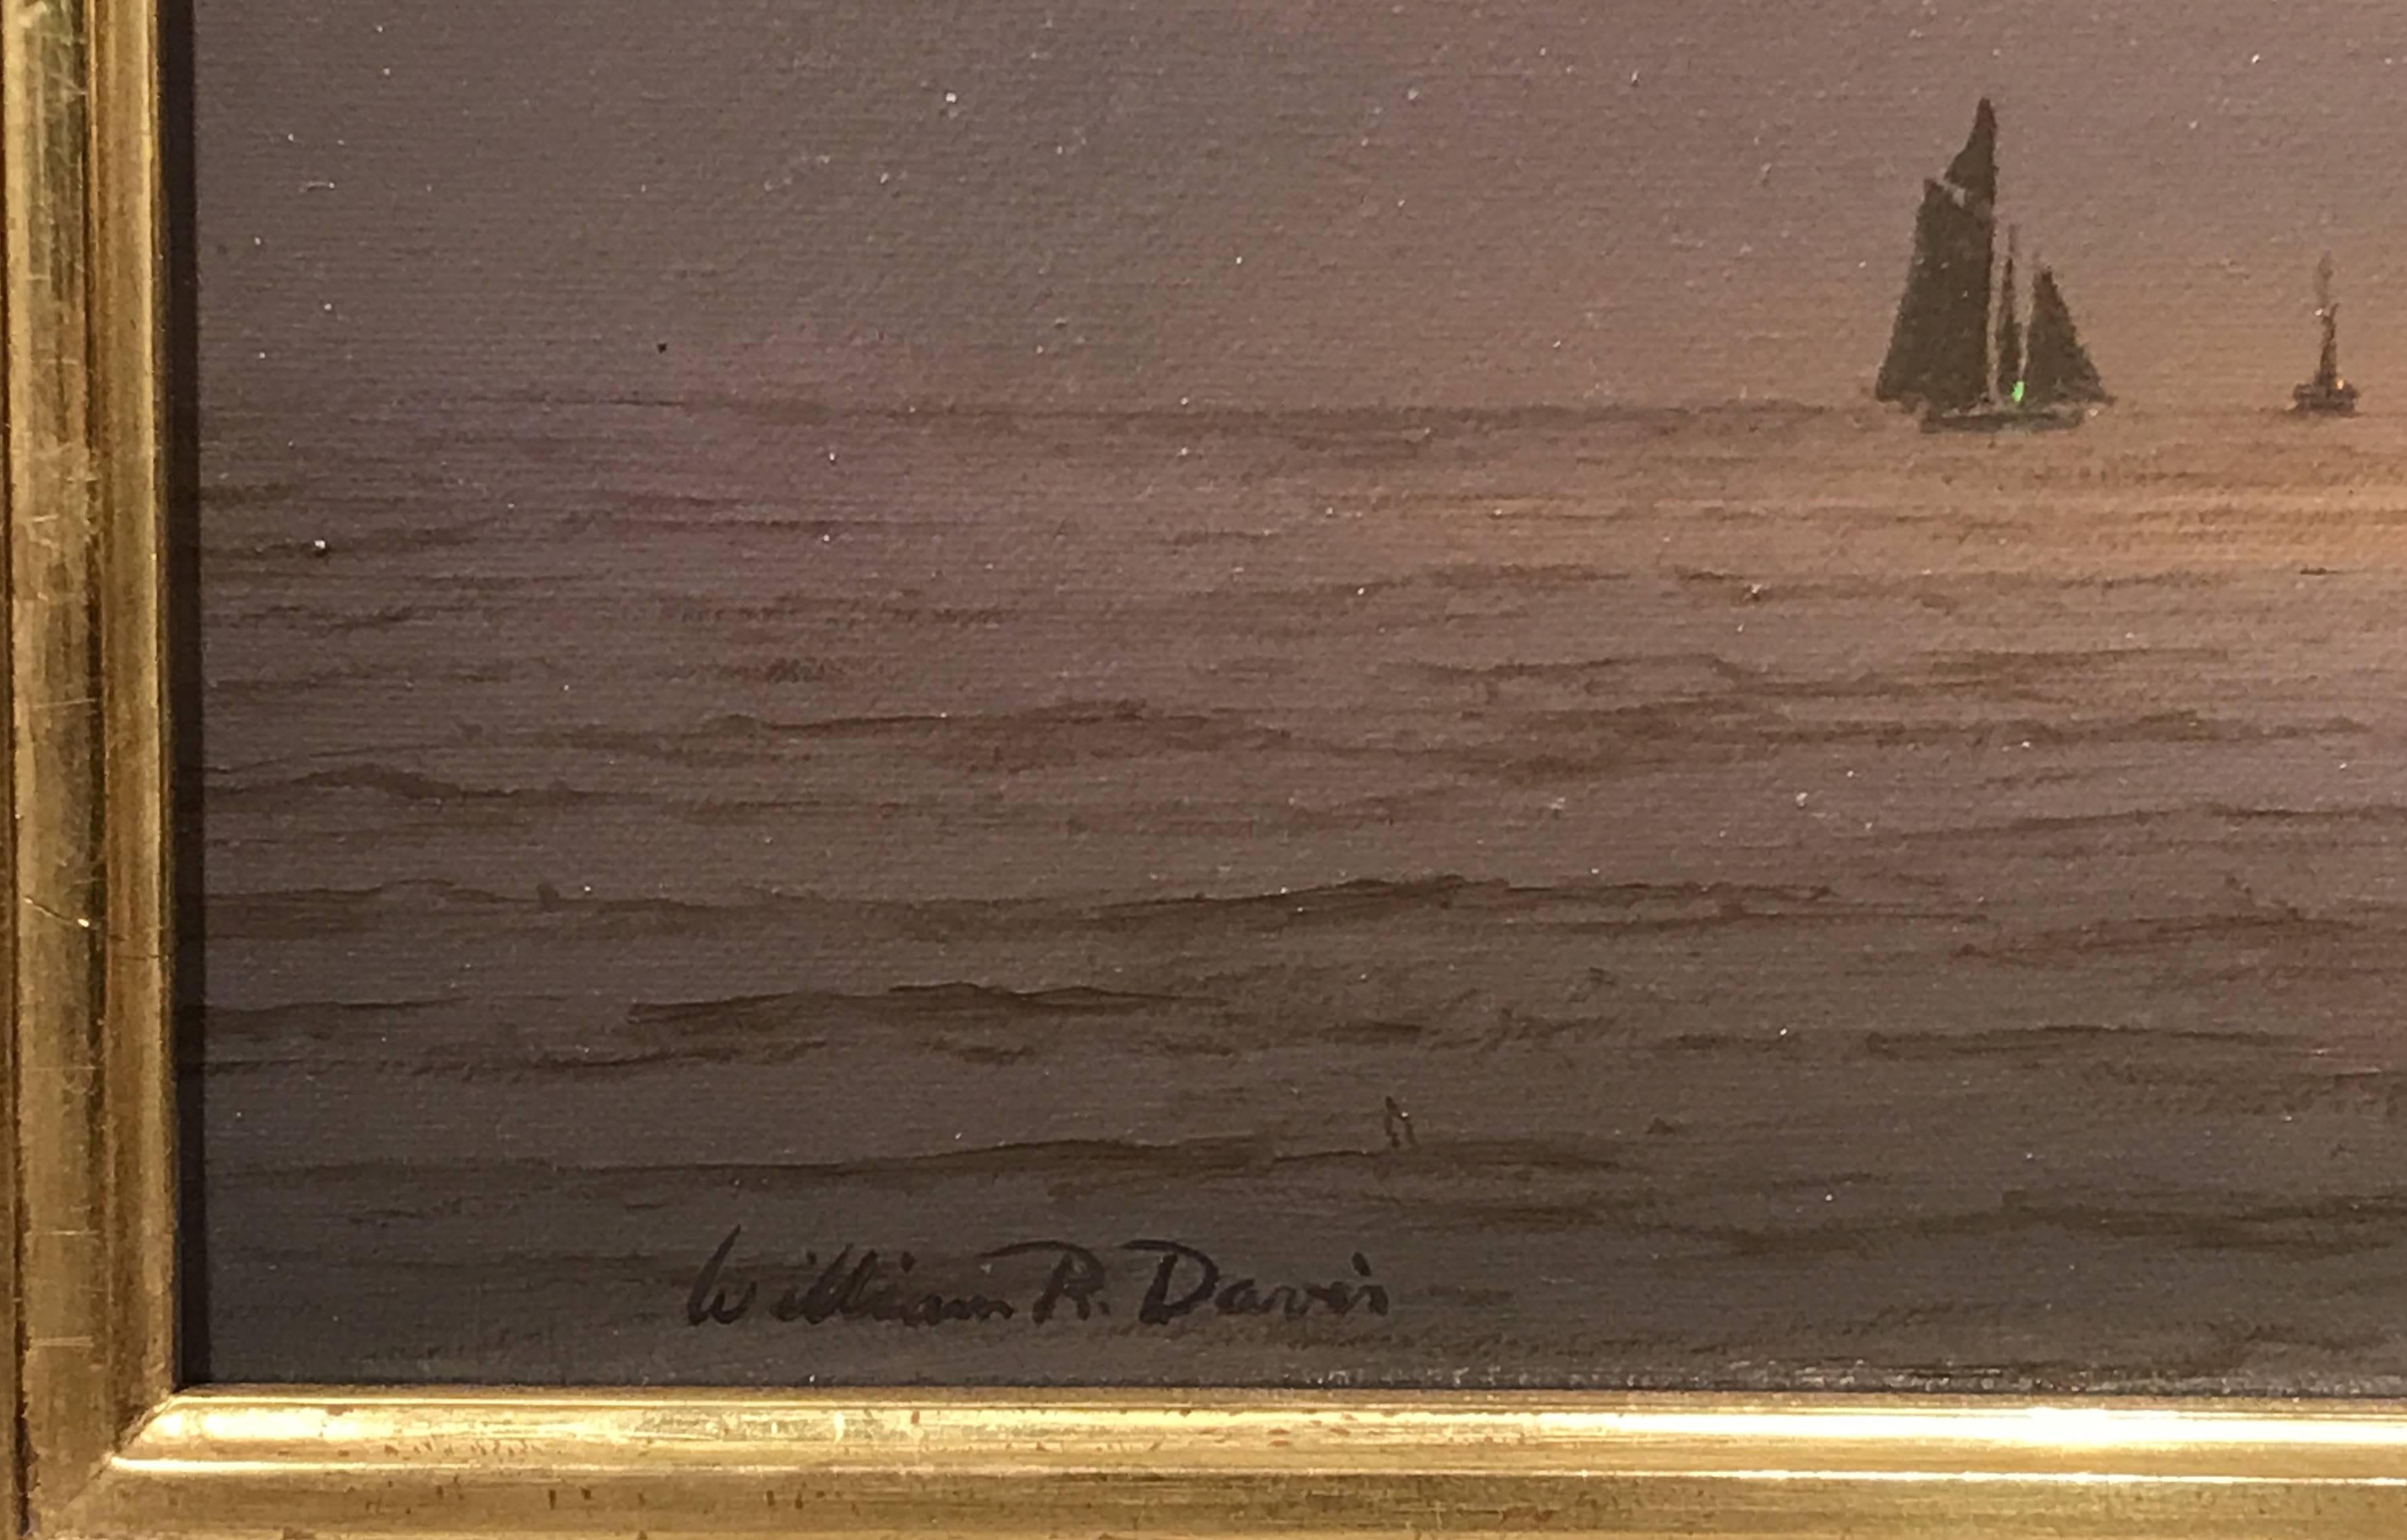 This spectacular luminist marine oil painting of a ship at sunset off the coast of Fairhaven, Massachusetts was painted by American artist William R. Davis (1952-). Davis was born in Somerville, Massachusetts, grew up in Hyannis Port, MA and became